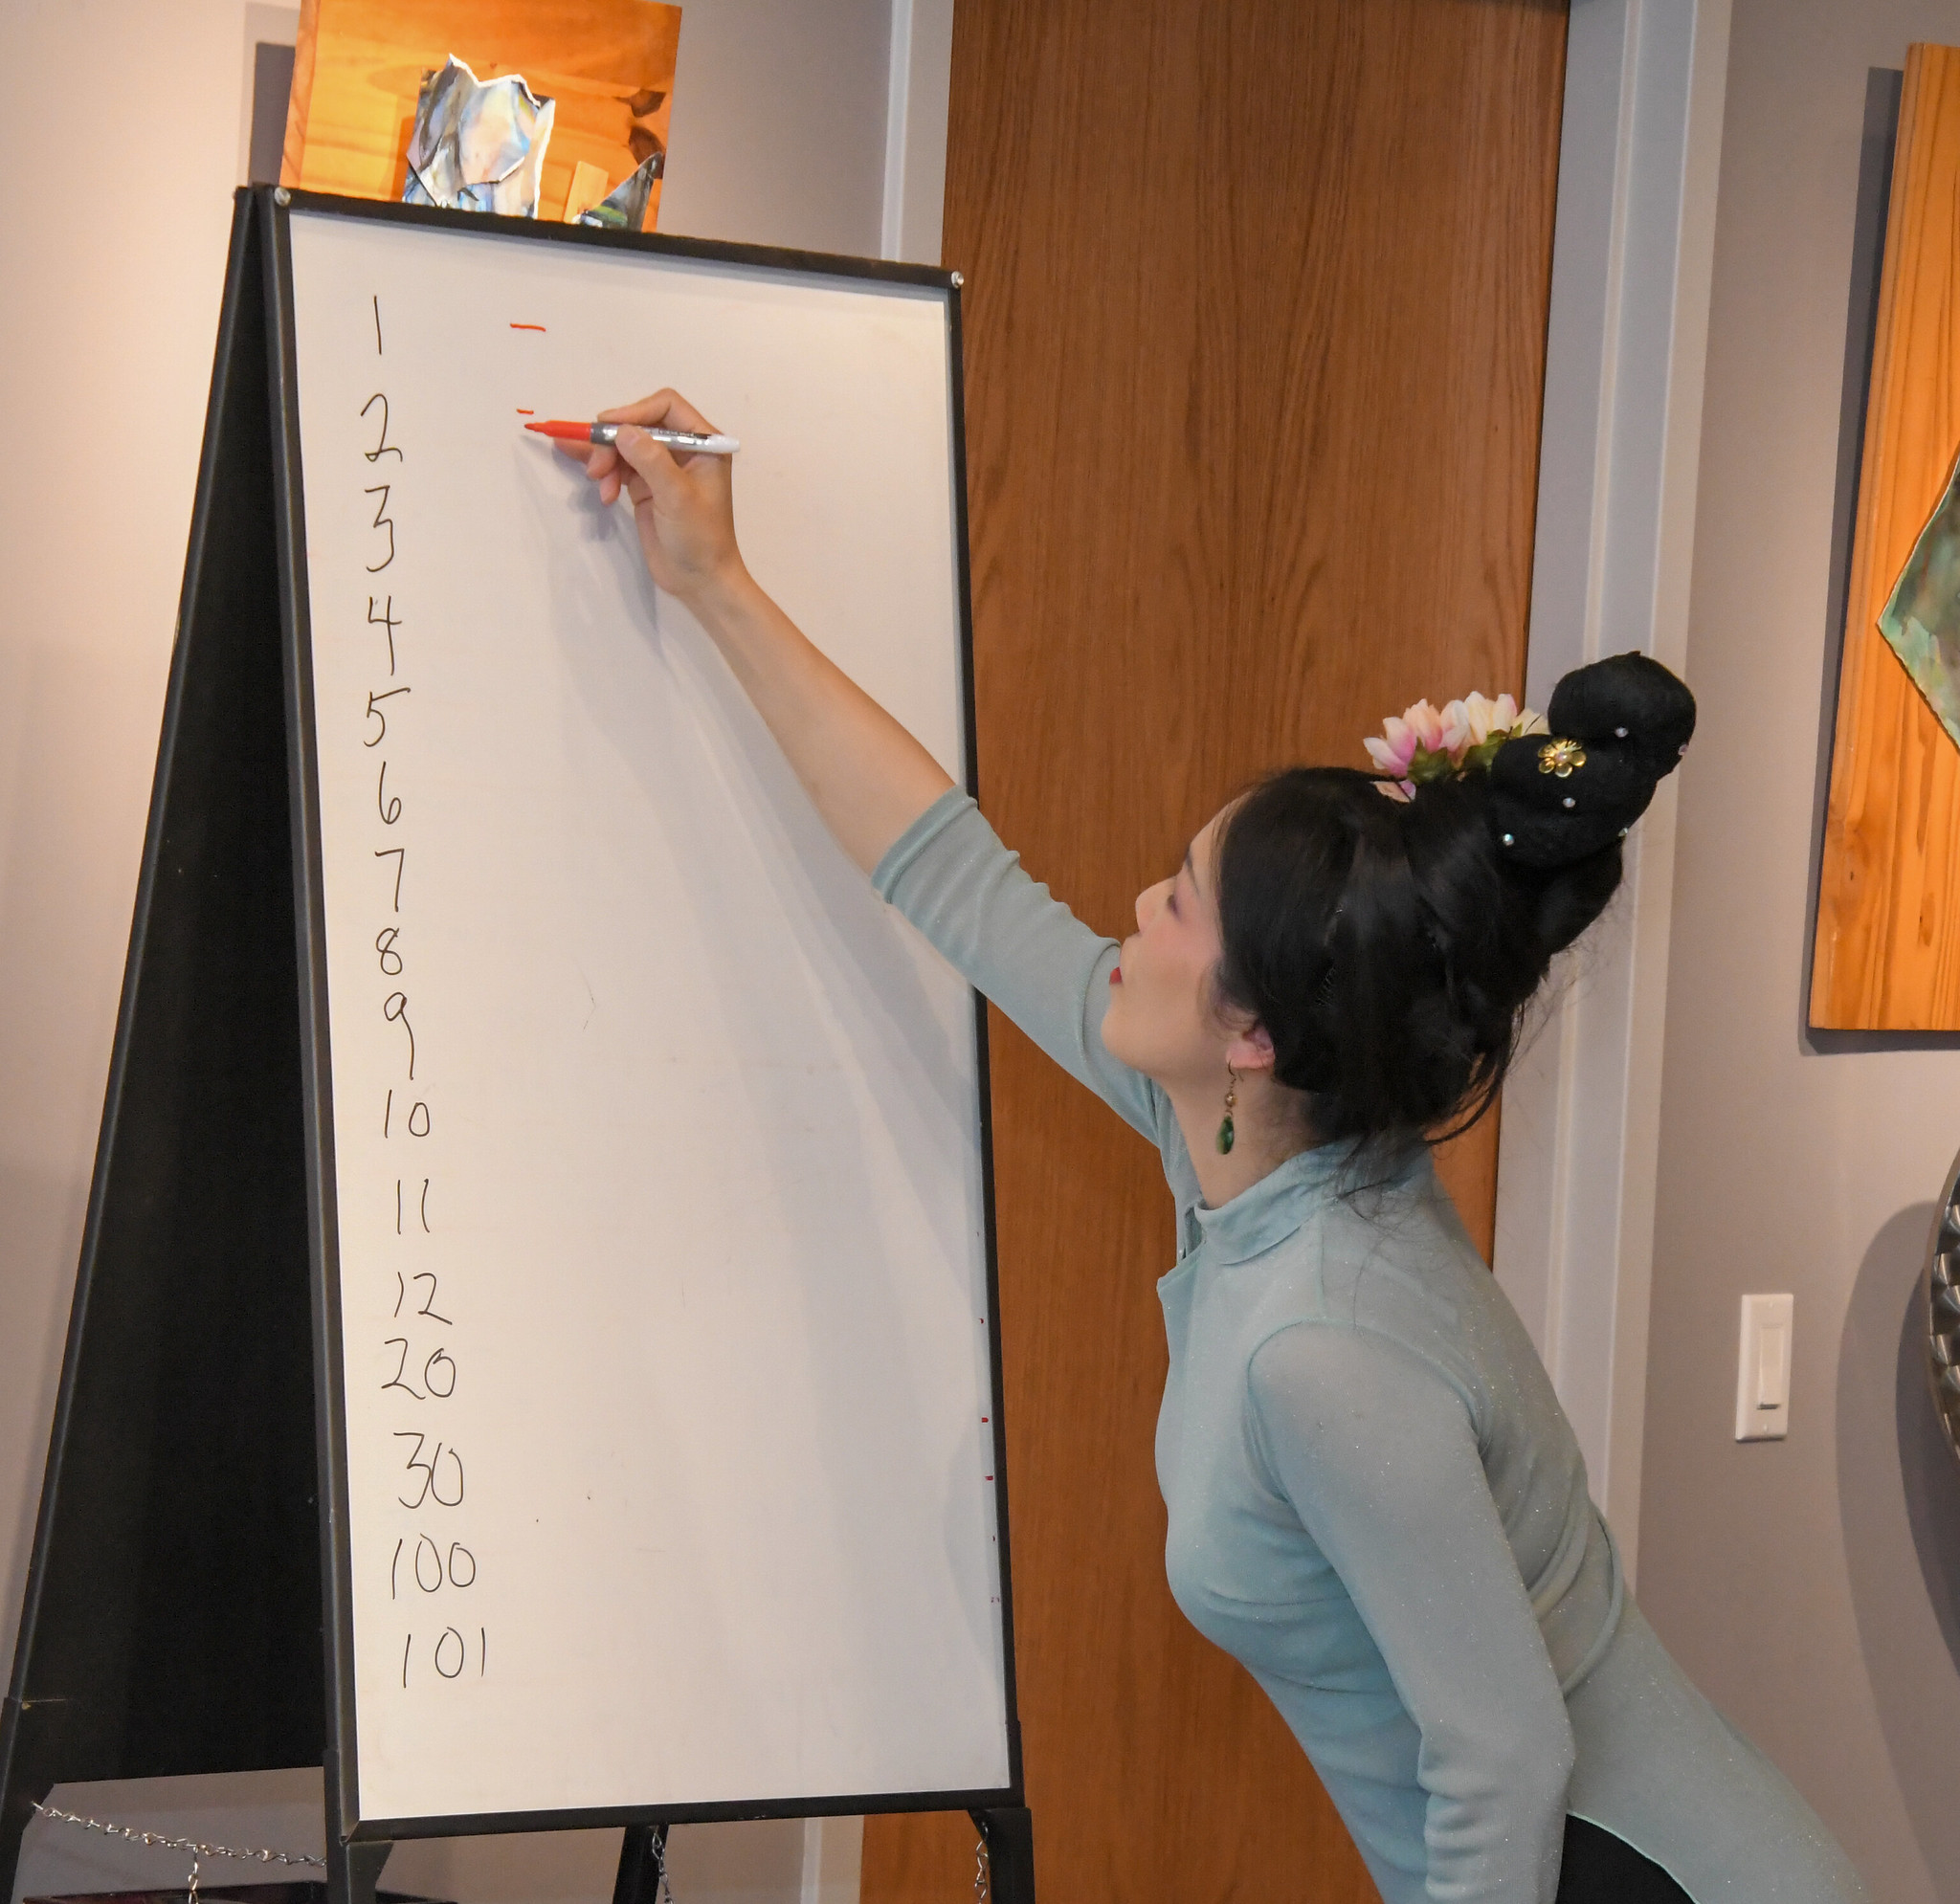 Image 5 Wendi Weng teaching the chinese numerals